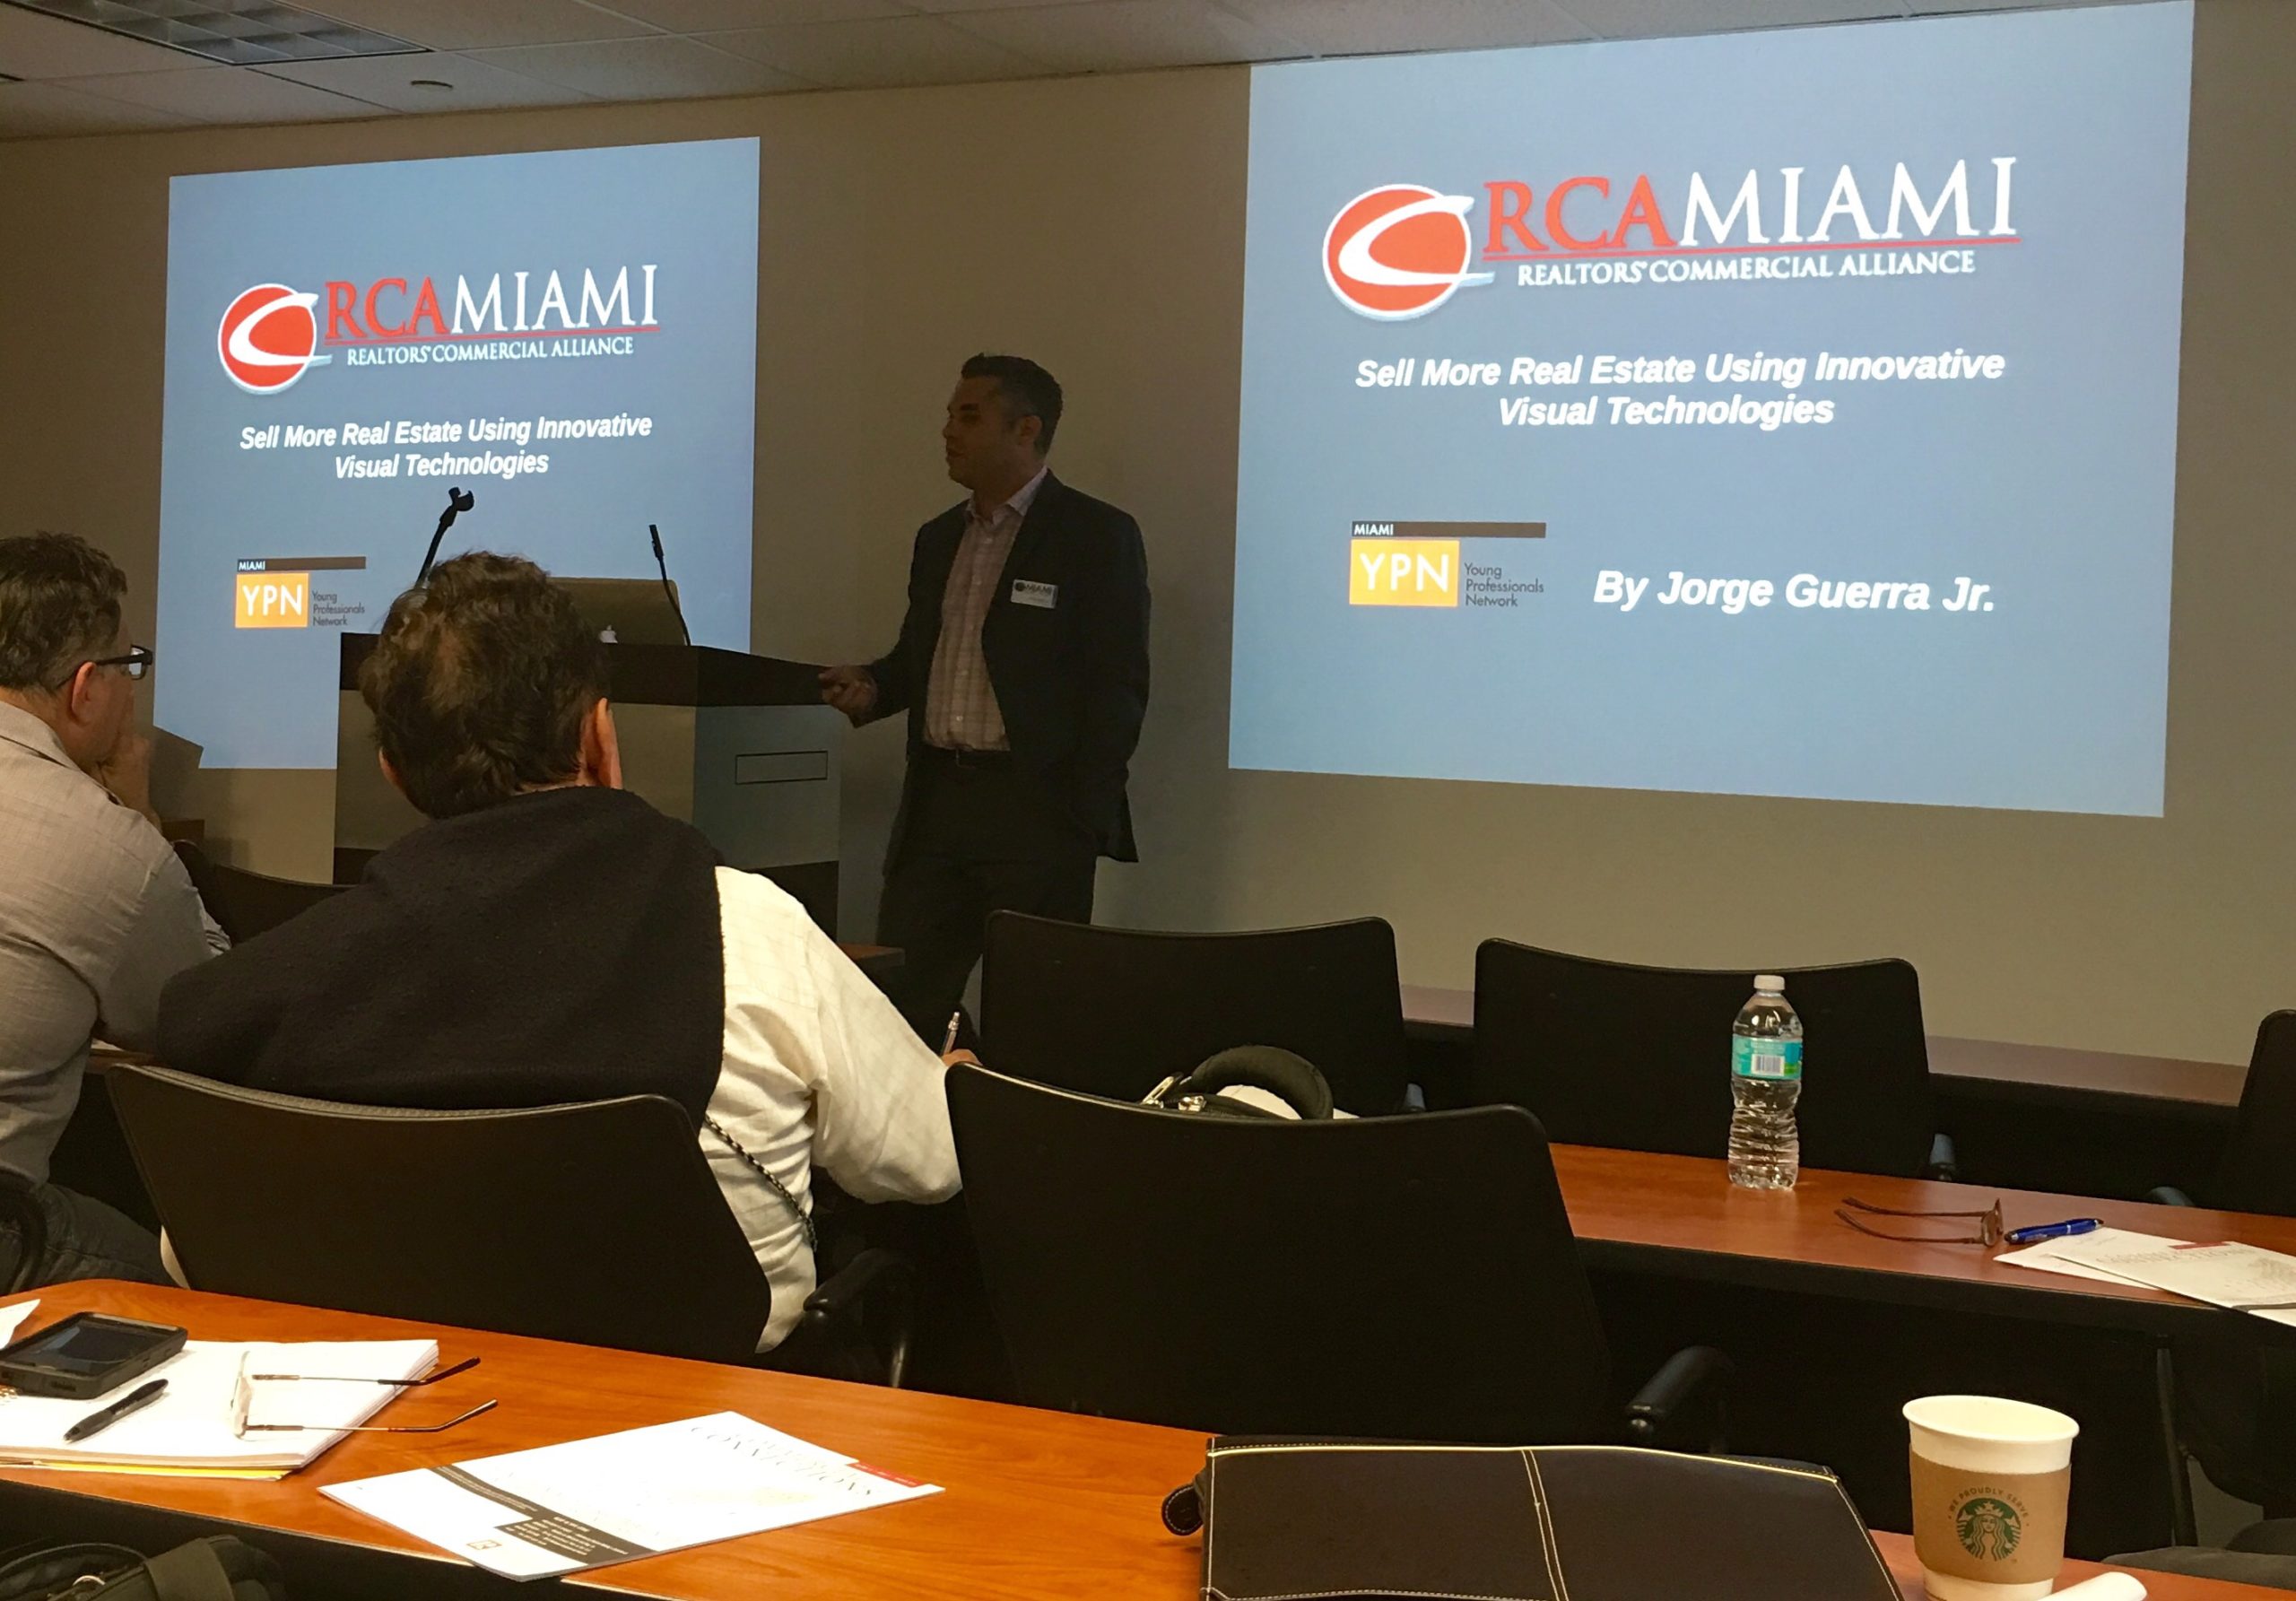 RCA Miami taps Jorge Guerra Jr for a special presentation on visual technology.